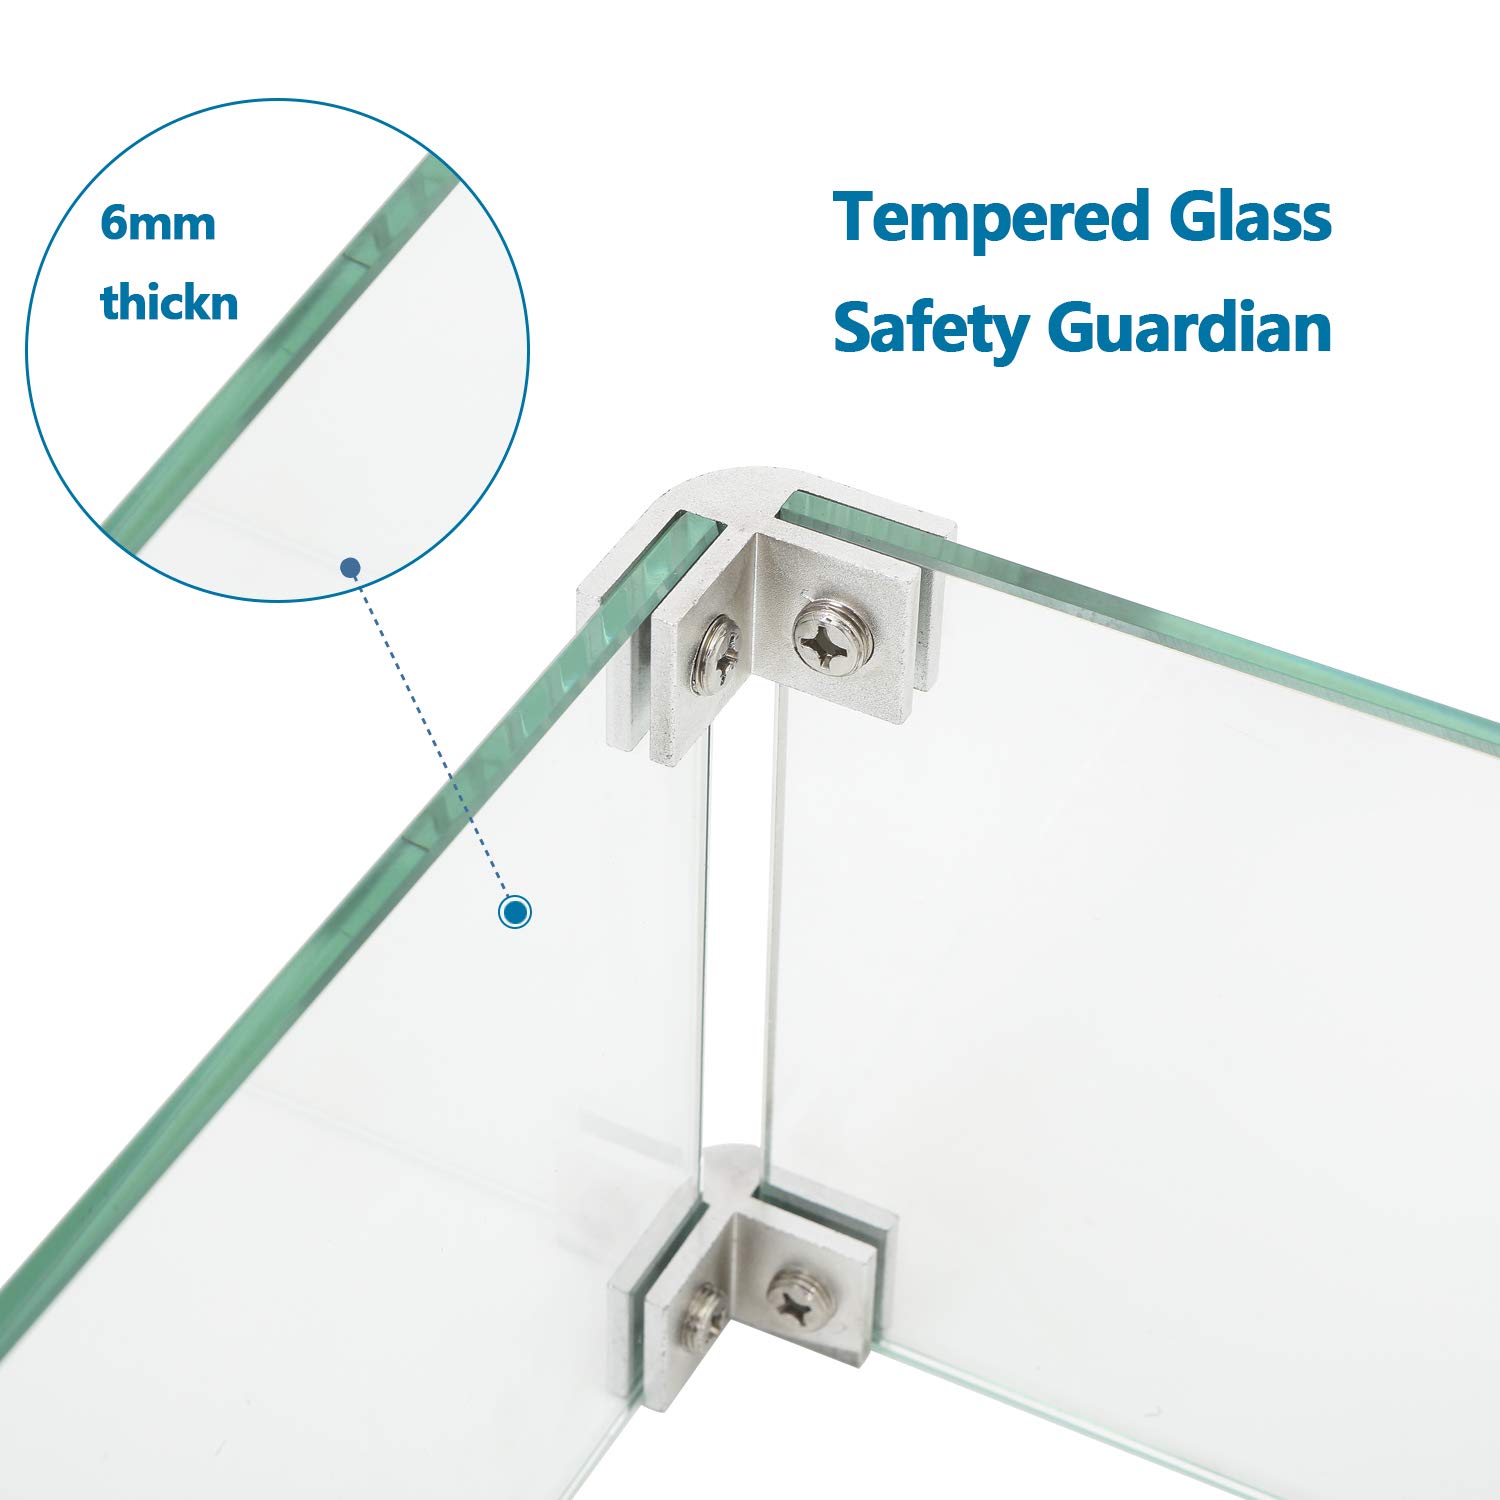 COSIEST Glass Wind Guard, Rectangle, Tempered Glass for Outdoor Fire Pit, 19.5x7.5x5.5 inches